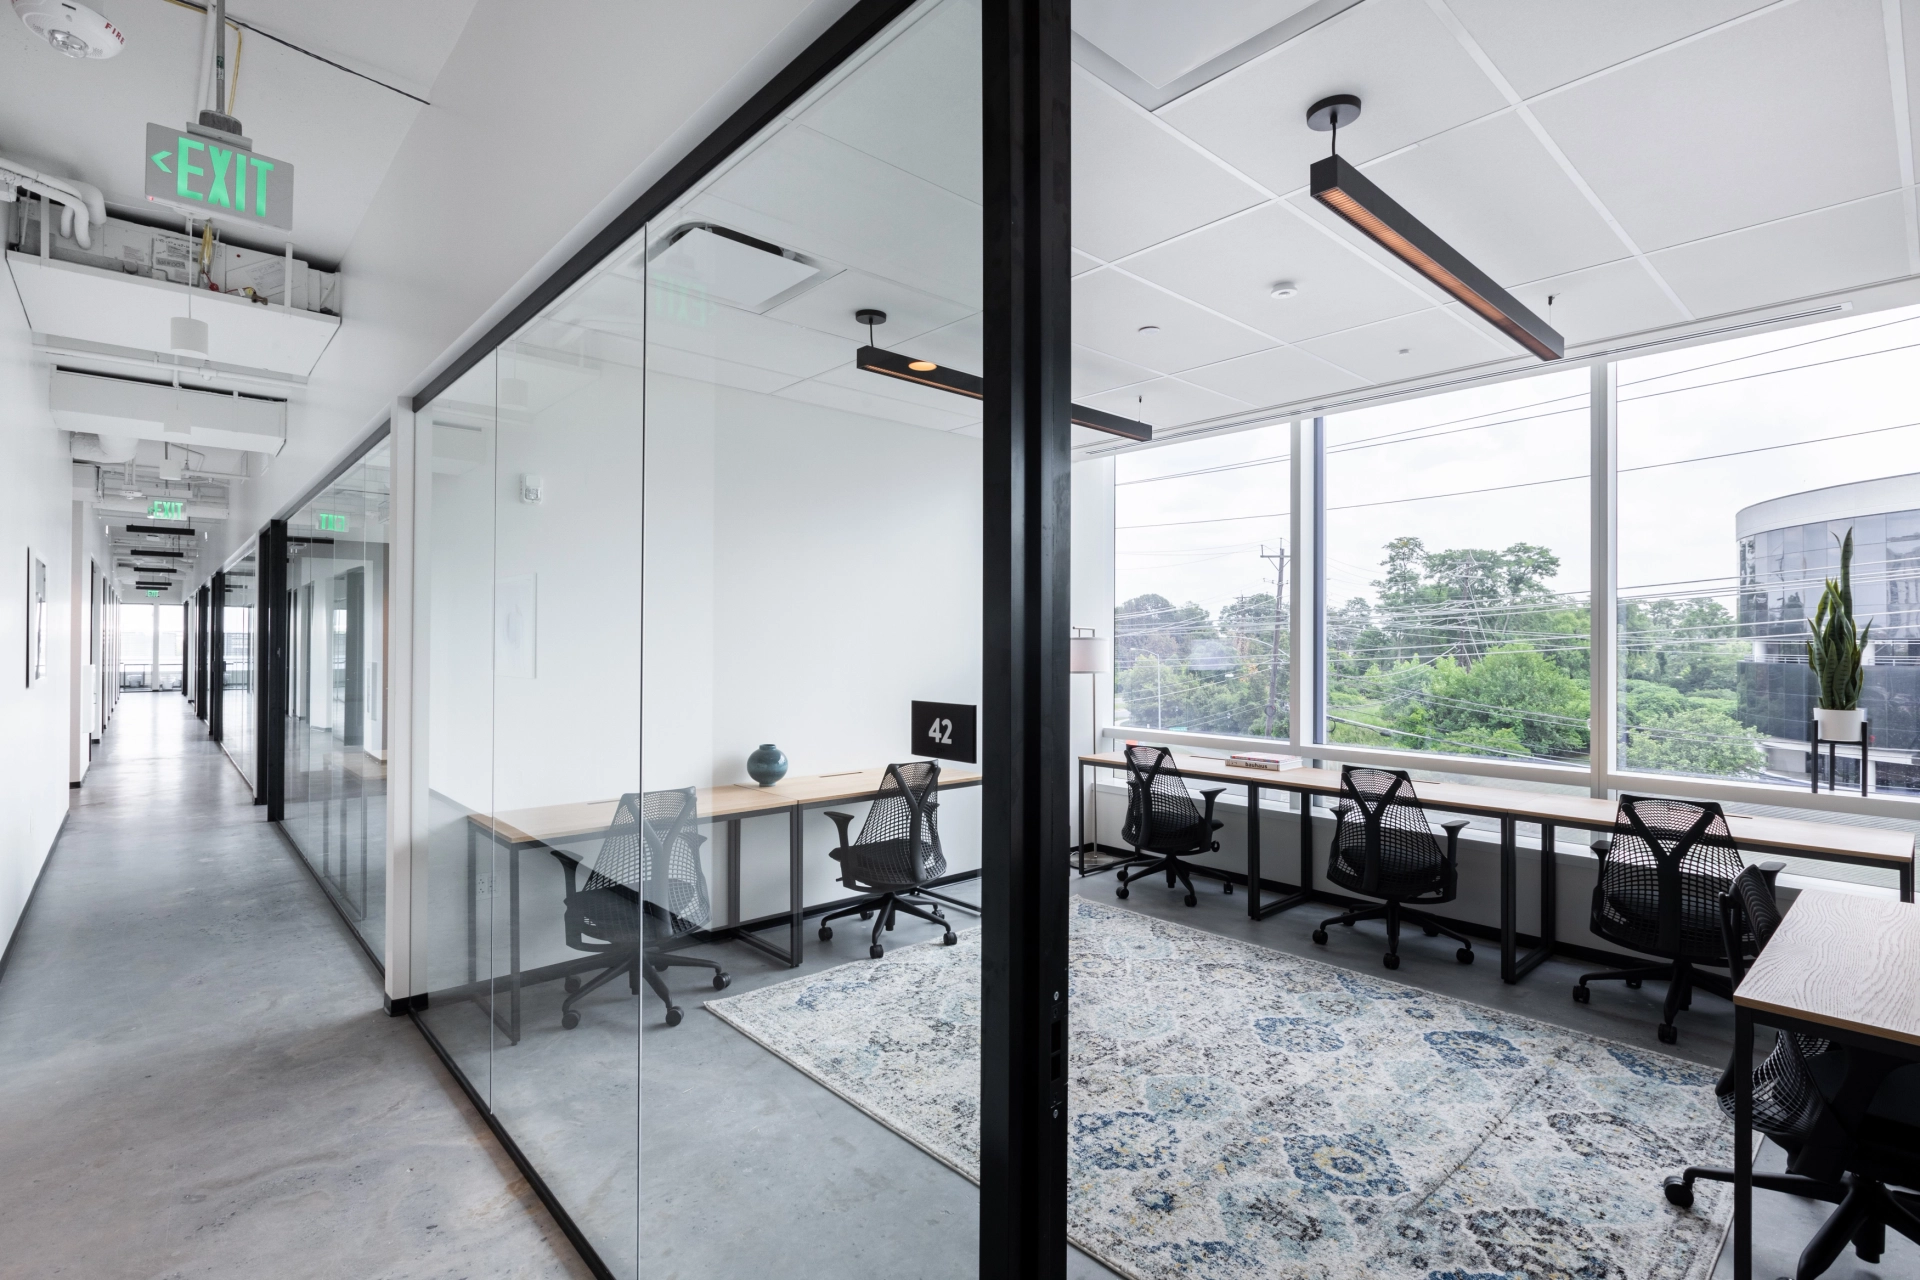 An open office with glass walls and desks, ideal for coworking.